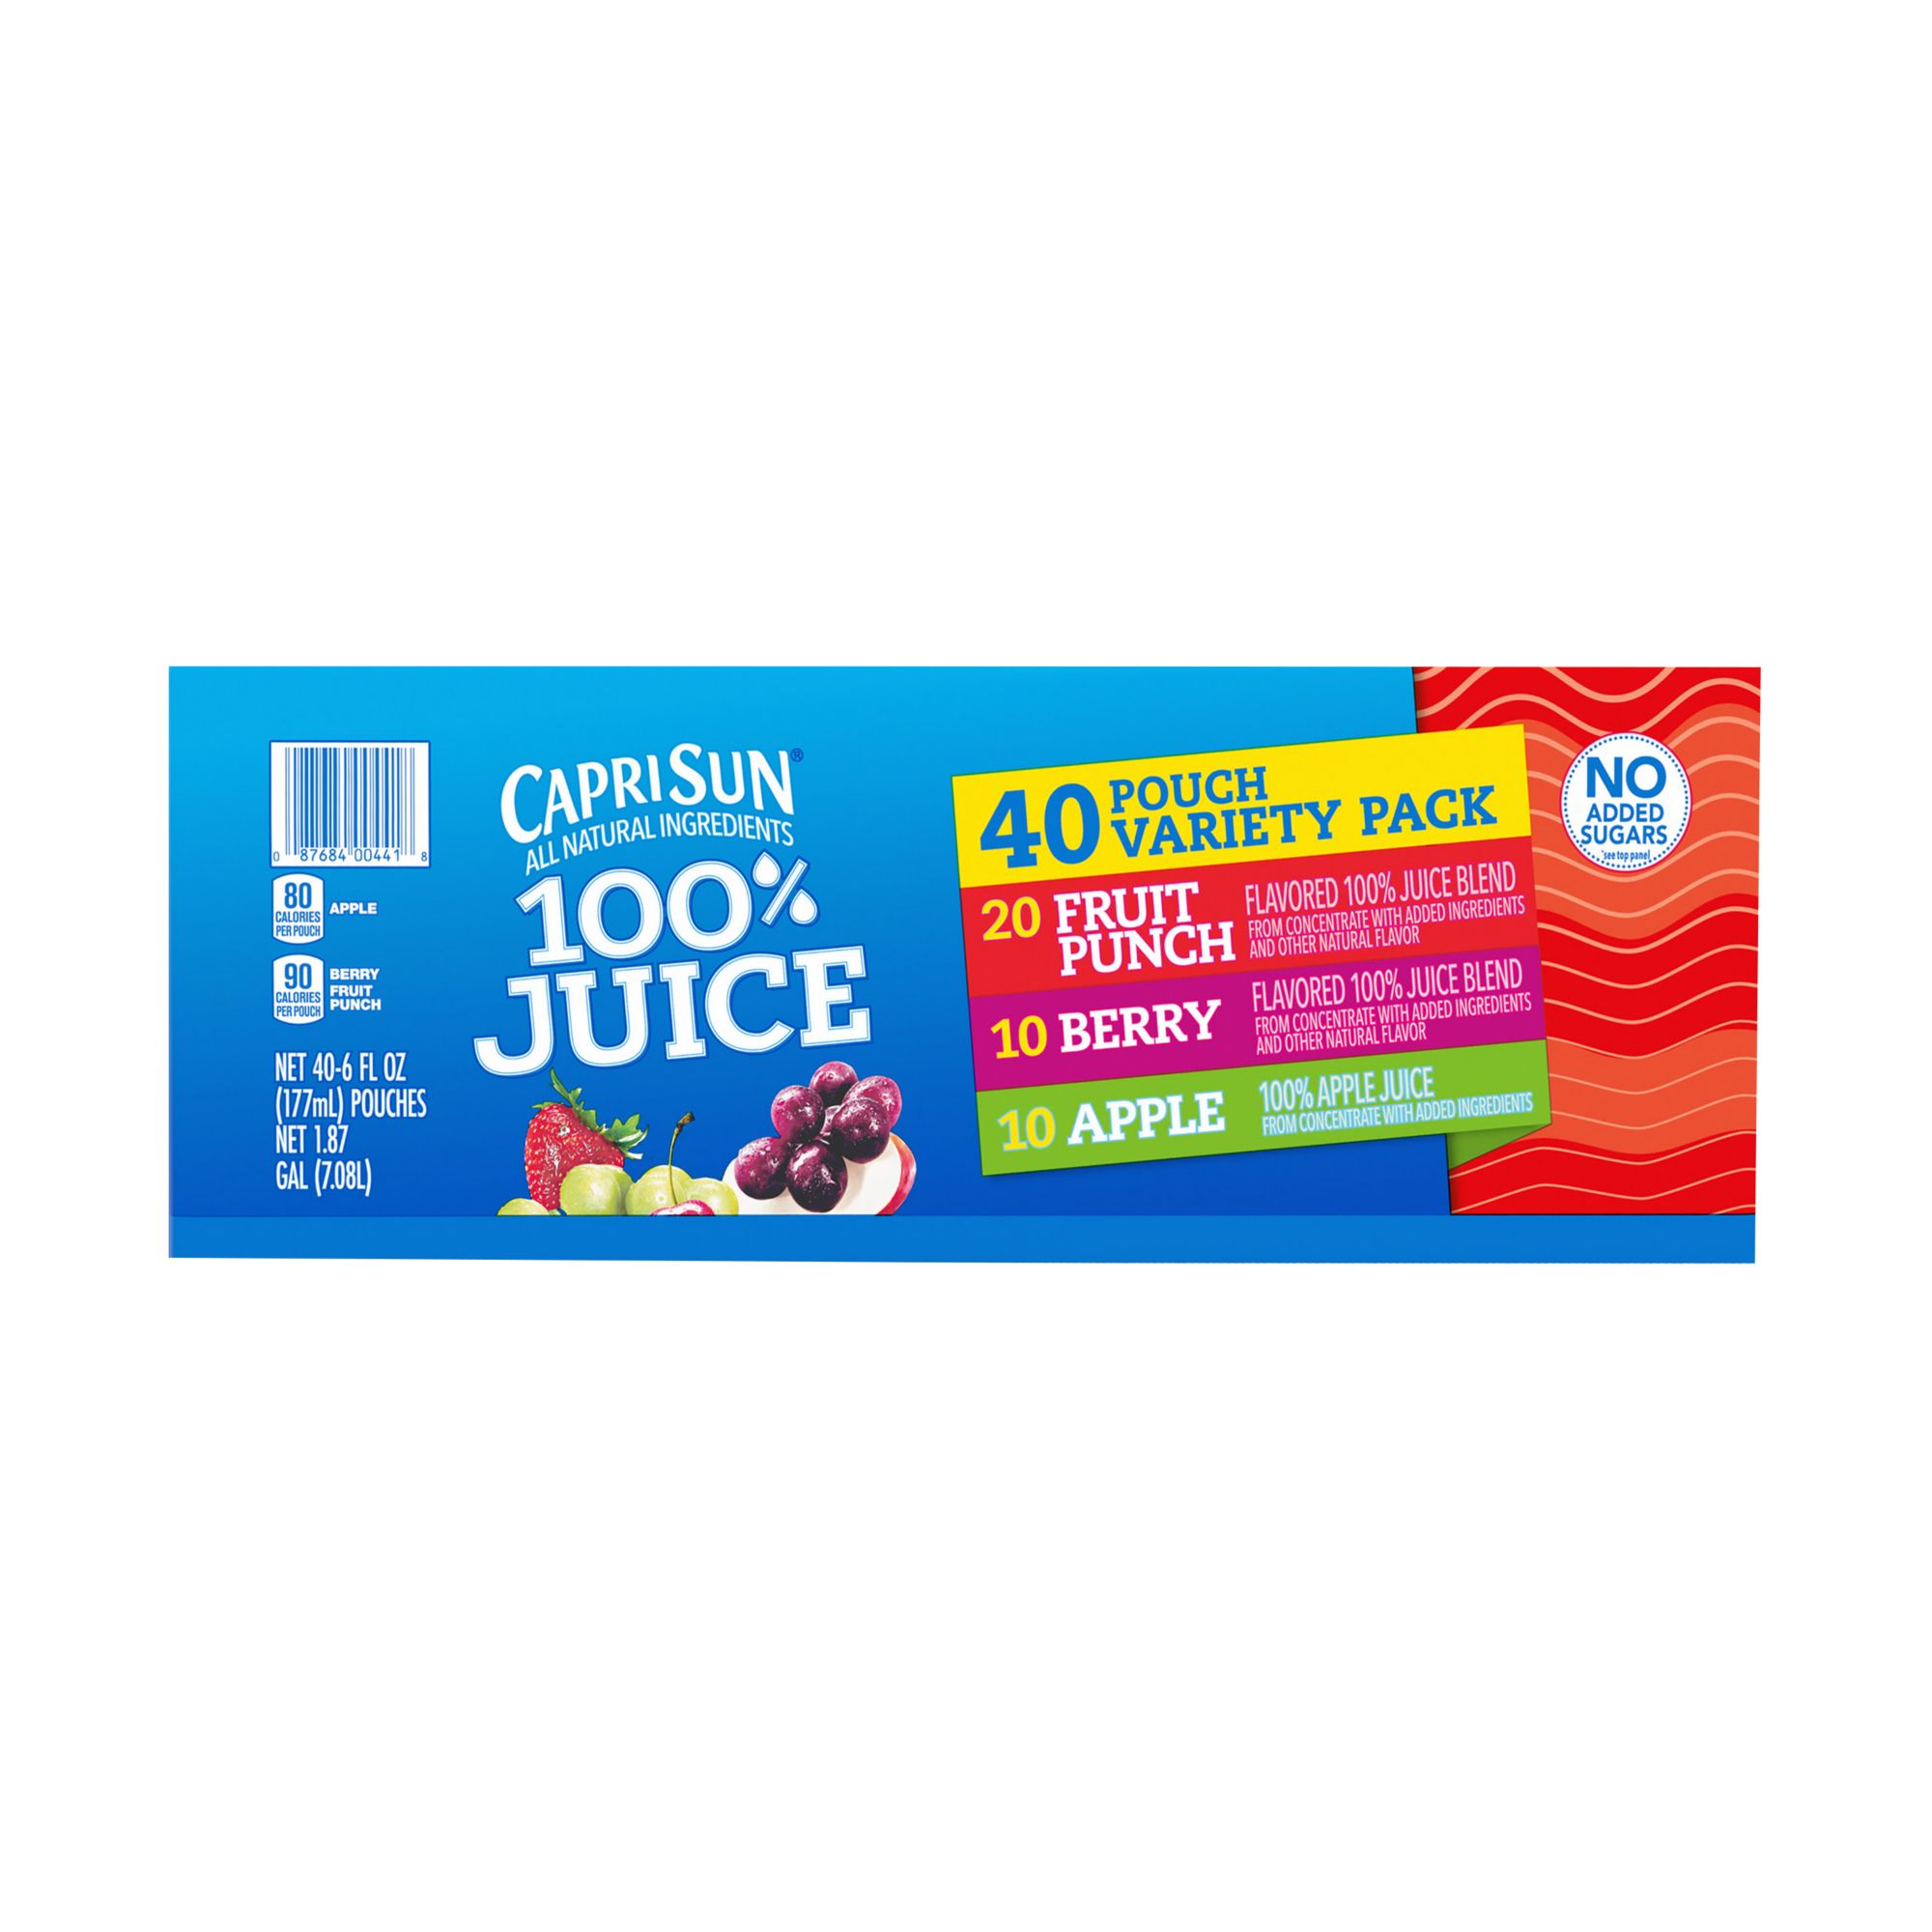 Capri Sun 100% Juice Fruit Punch, Berry & Apple Naturally Flavored Juice  Variety Pack, 40 ct Box, 6 fl oz Pouches 